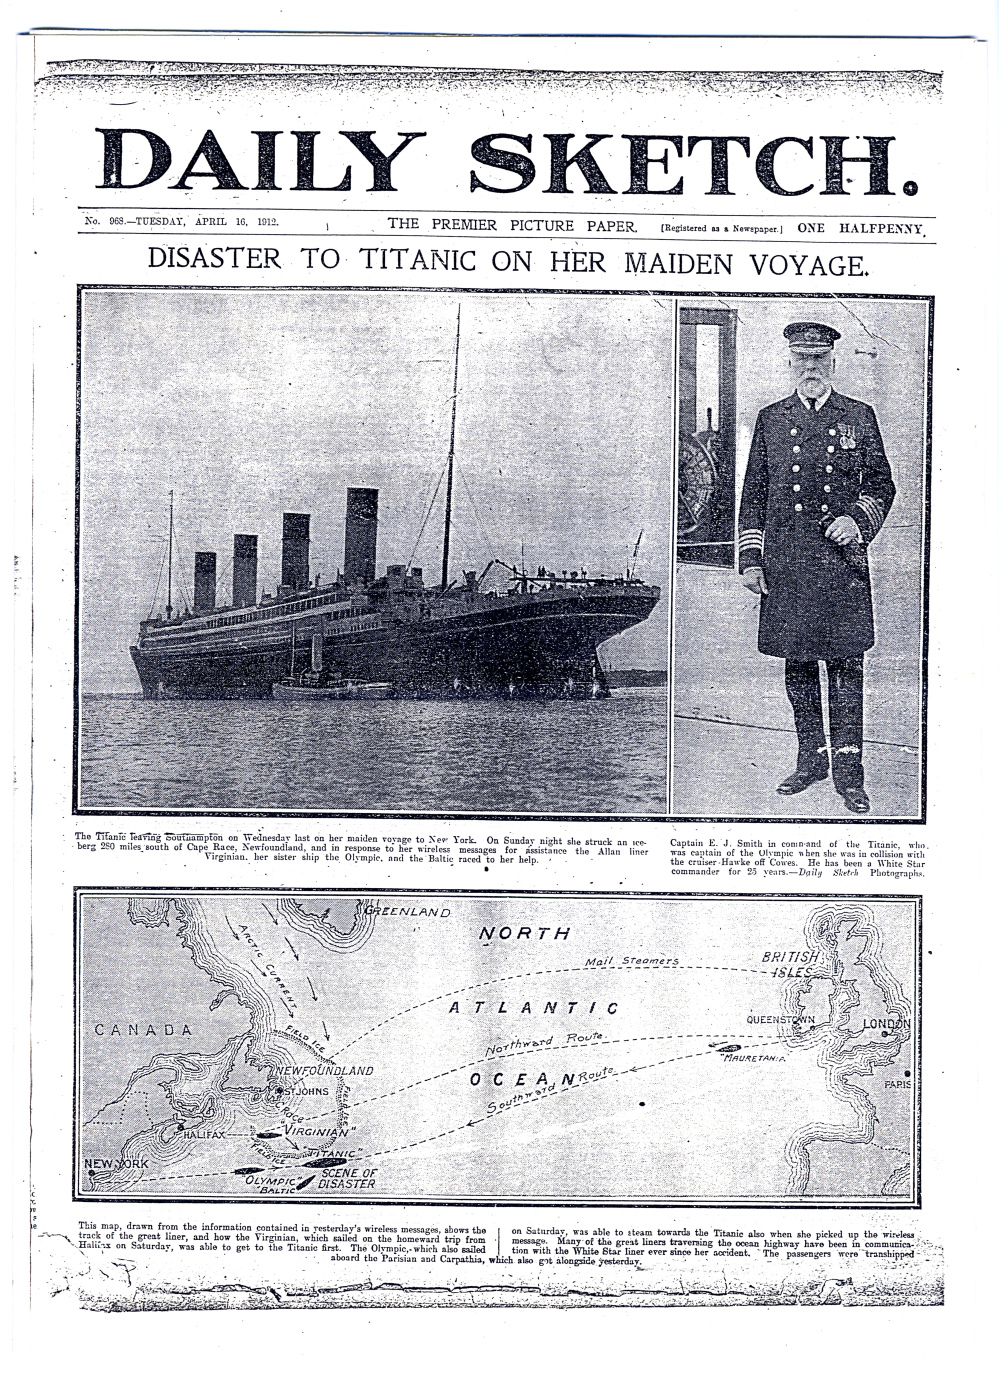 preview image for Facsimile of Daily Sketch of April 16, 1912, Reporting the Titanic Disaster